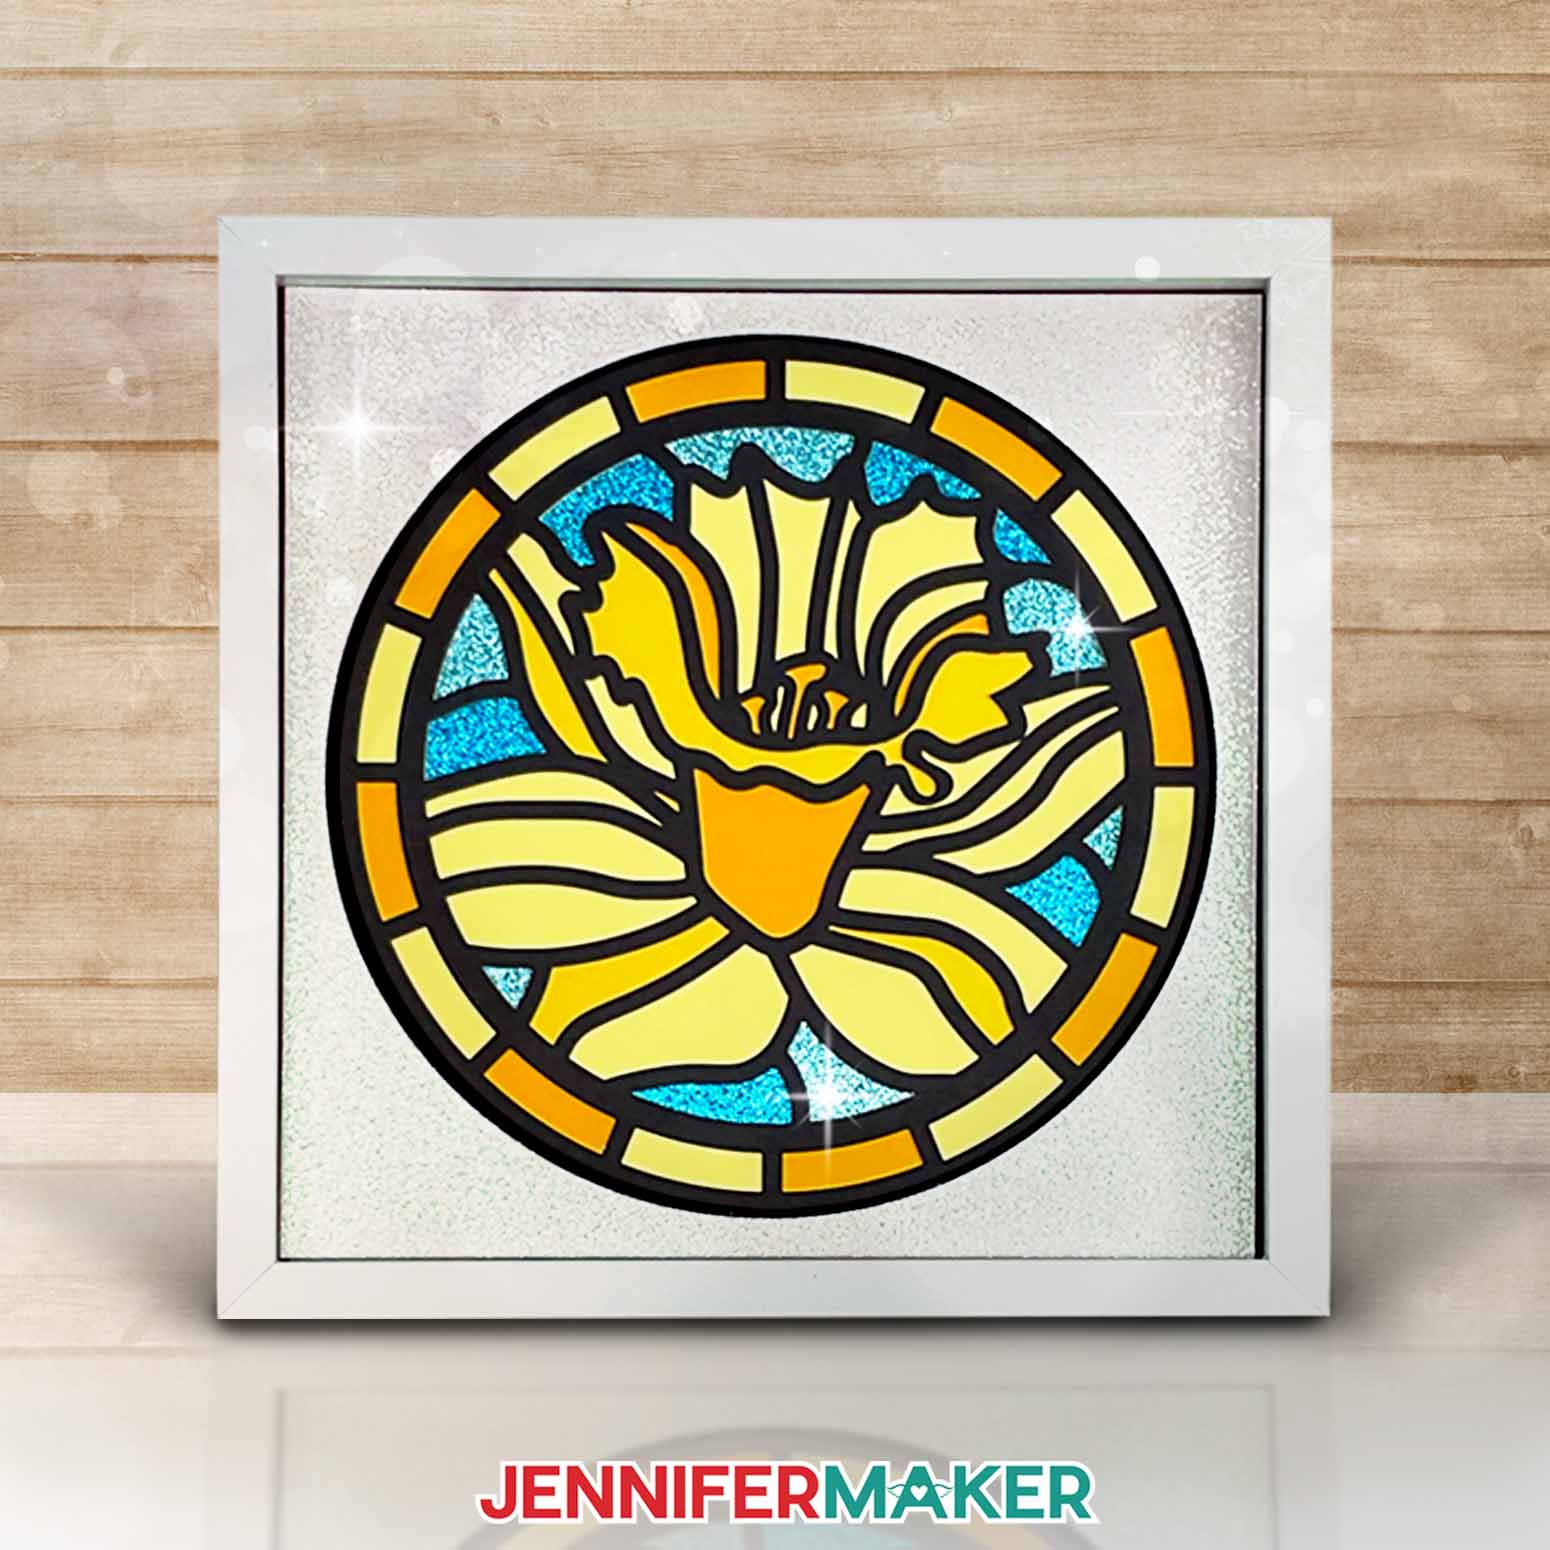 The completed and framed Daffodil design.